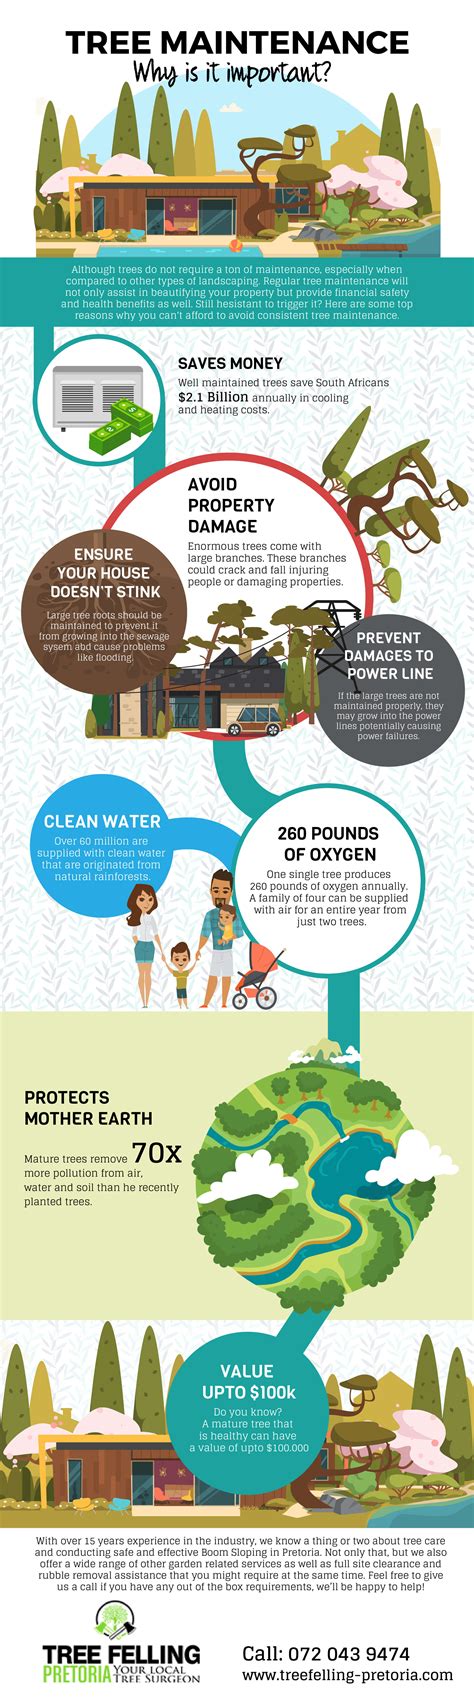 The Benefits That Come With Caring For Trees Infographic